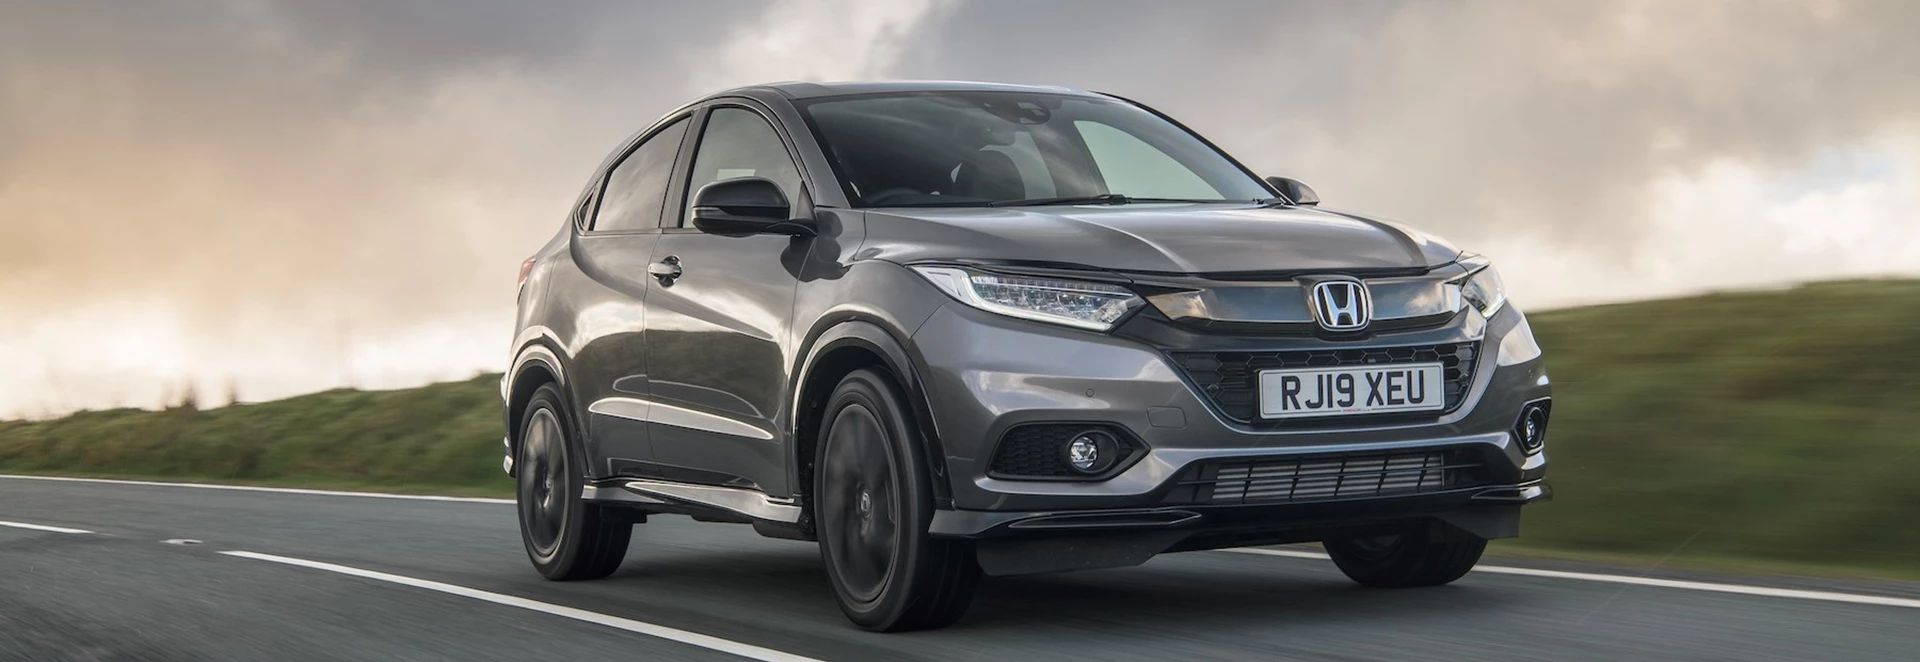 Buyer’s guide to the Honda HR-V 